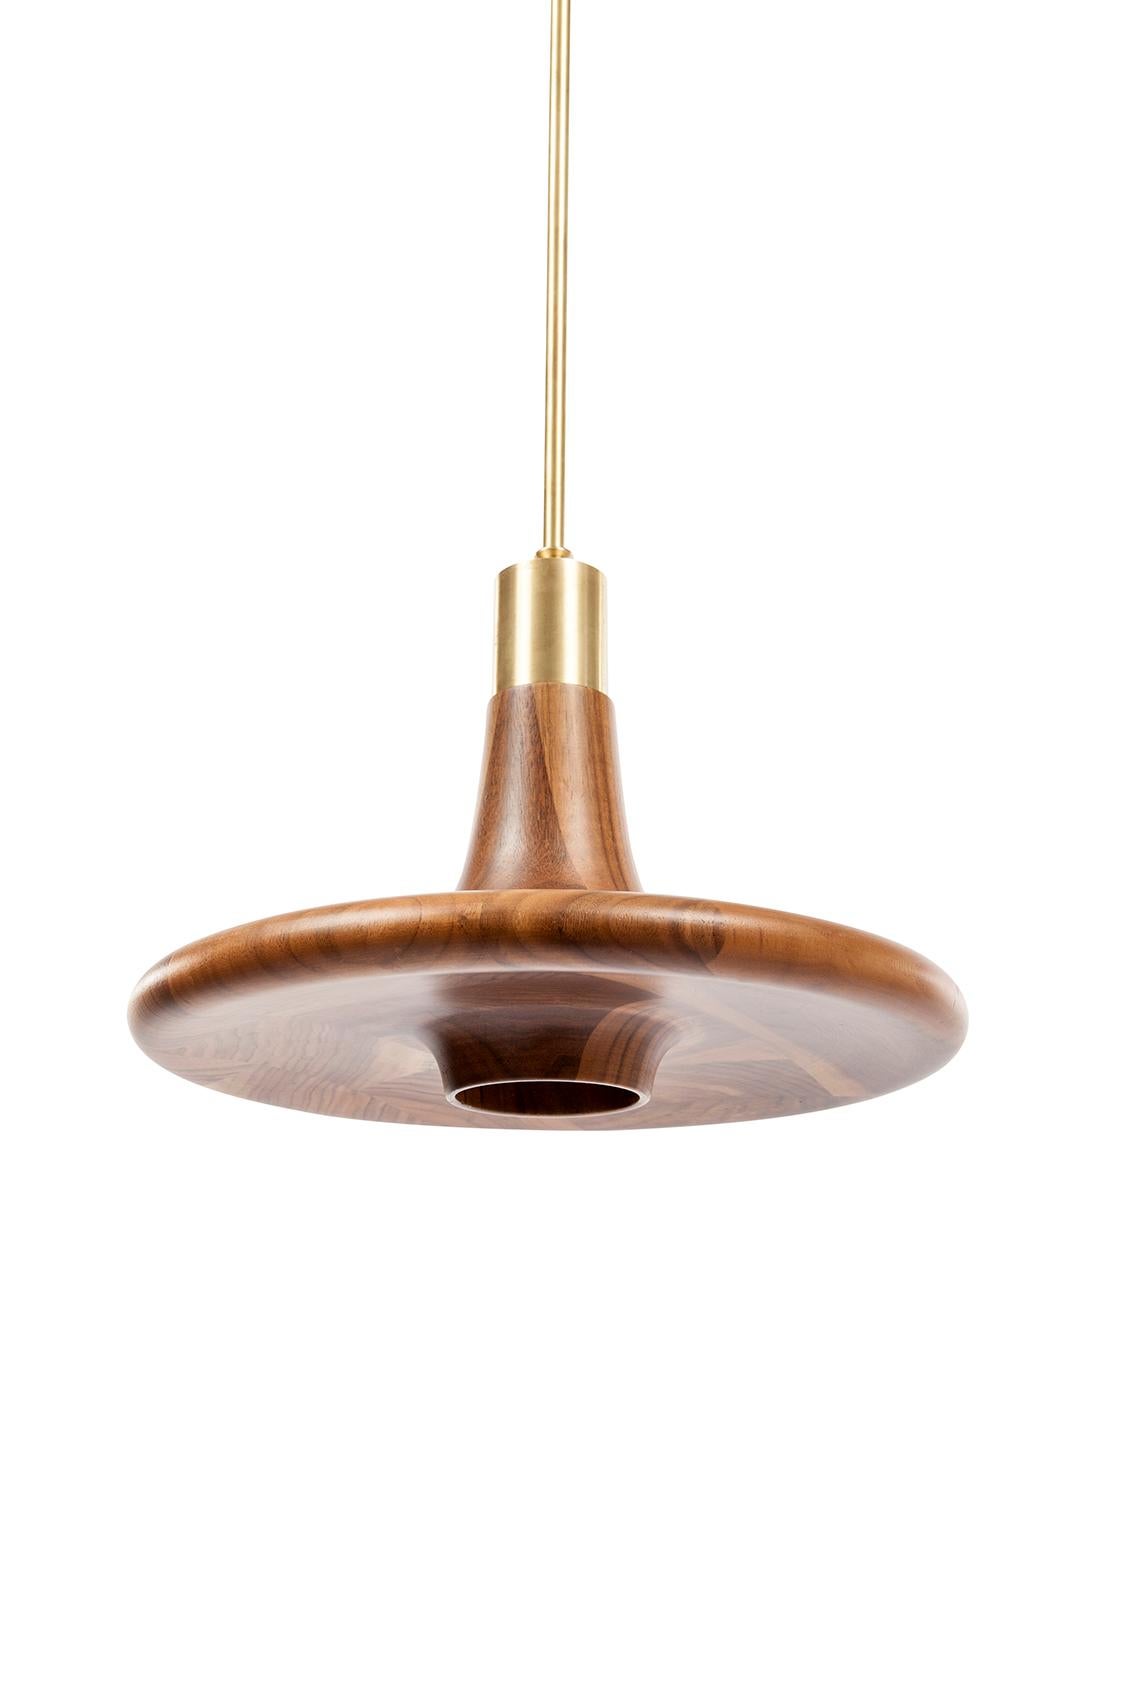 A minimalistic approach for pendant lighting which consists of metal details with a walnut/oak head.
Pendant light. Kitchen, Living room, bedroom.

